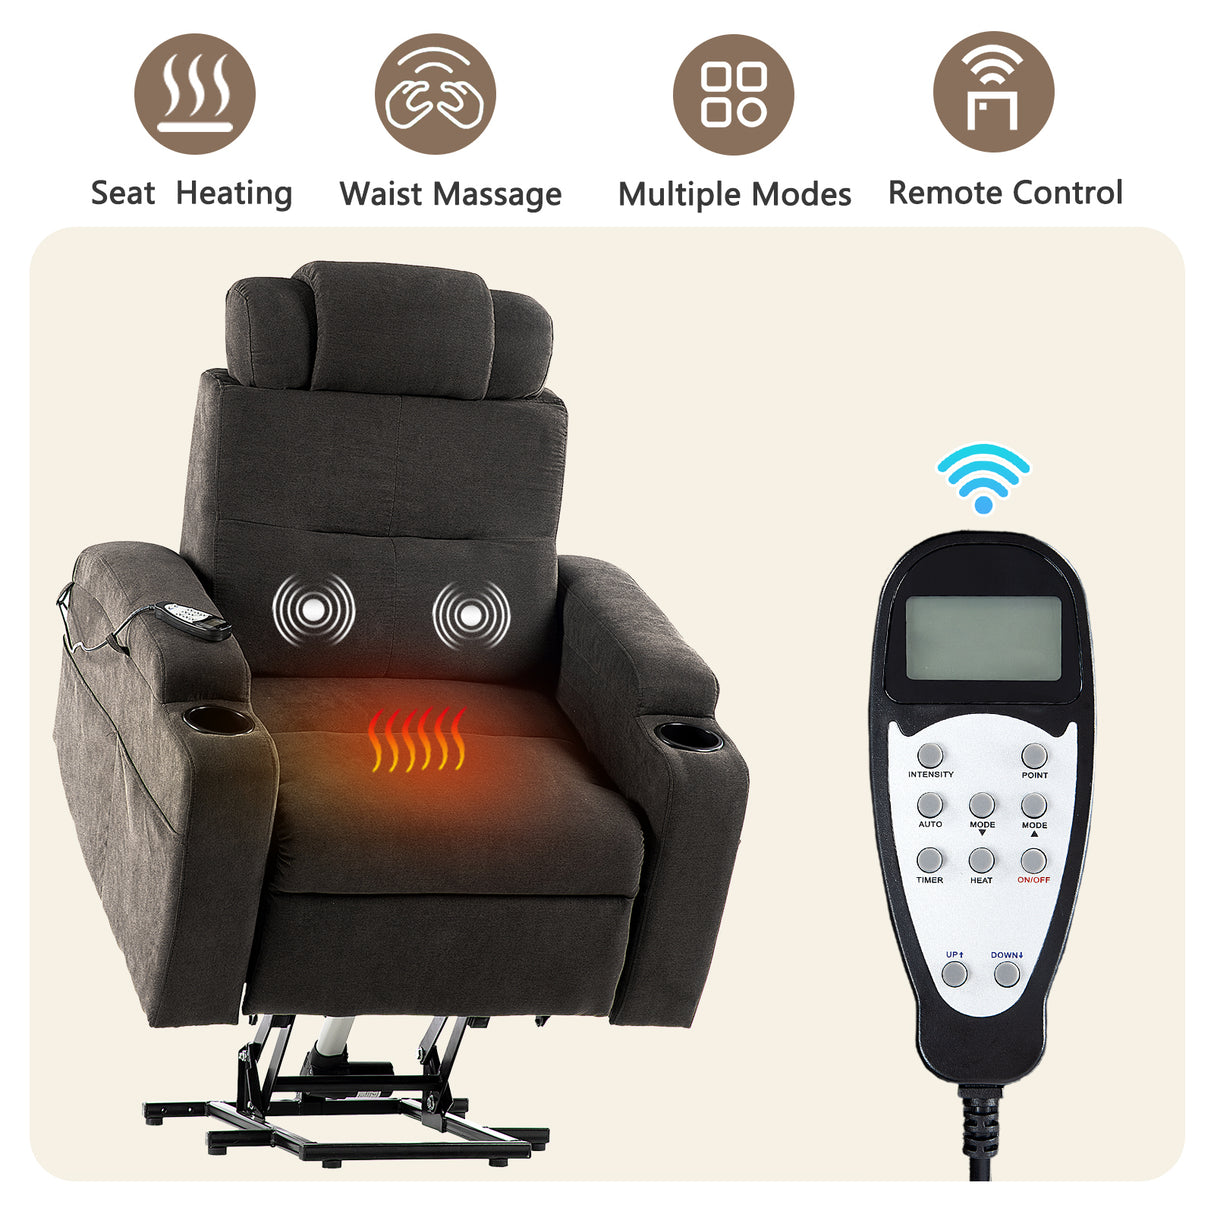 Lift Chairs Recliners for Elderly, Power Reomte Control with Heat and Massage, Upholstered Extra-wide Seat Side Pockets Cup Holders, Fashionable Headrest Thick Cushion (Dark Brown) Home Elegance USA